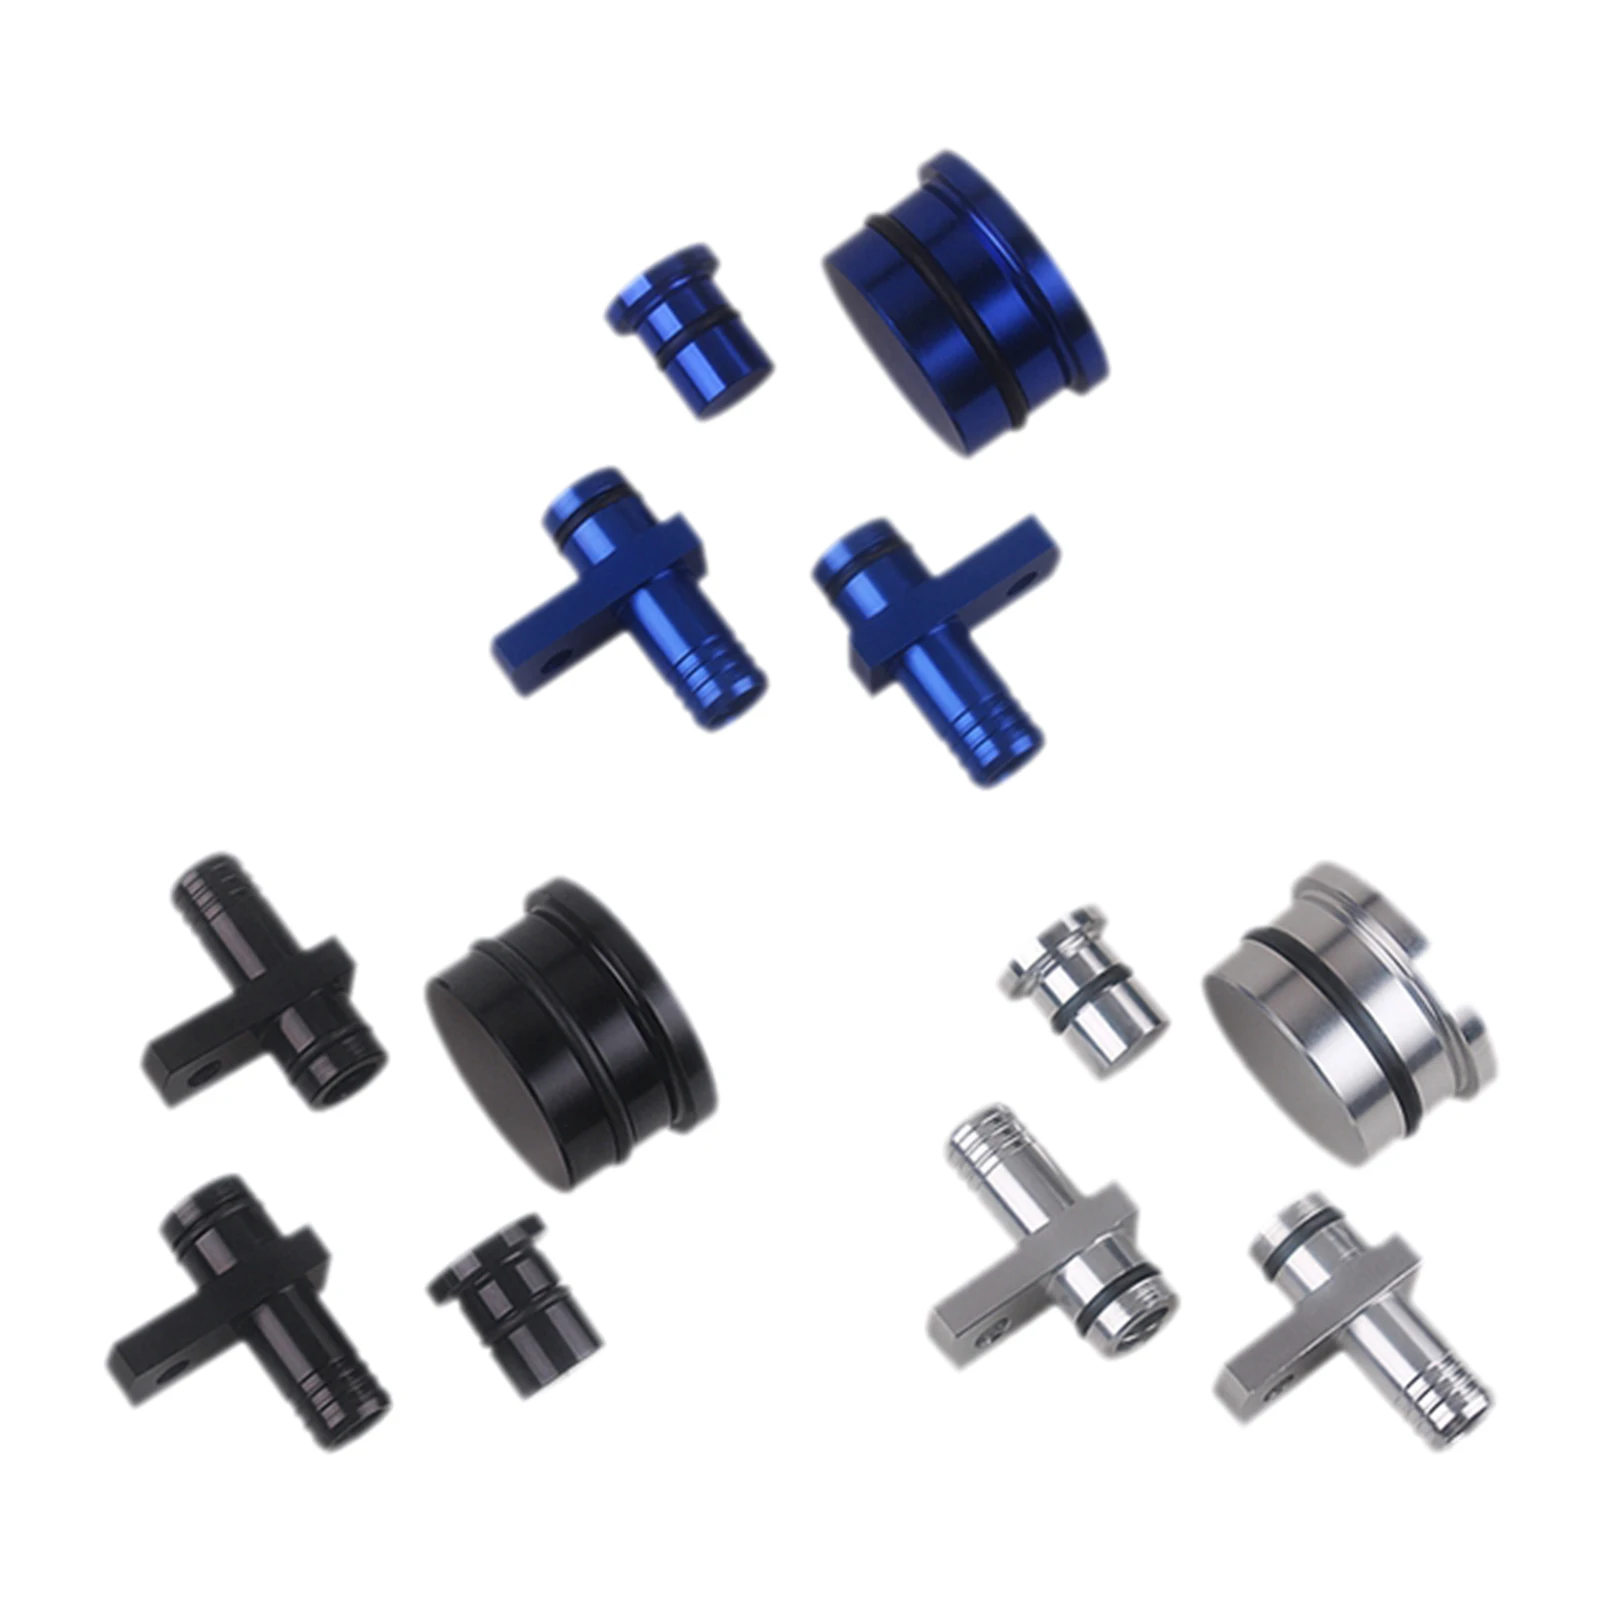 PCV Reroute Fitting Resonator Plug Reroute Assembly Kit with Upgraded For LLY LBZ LMM 6.6L